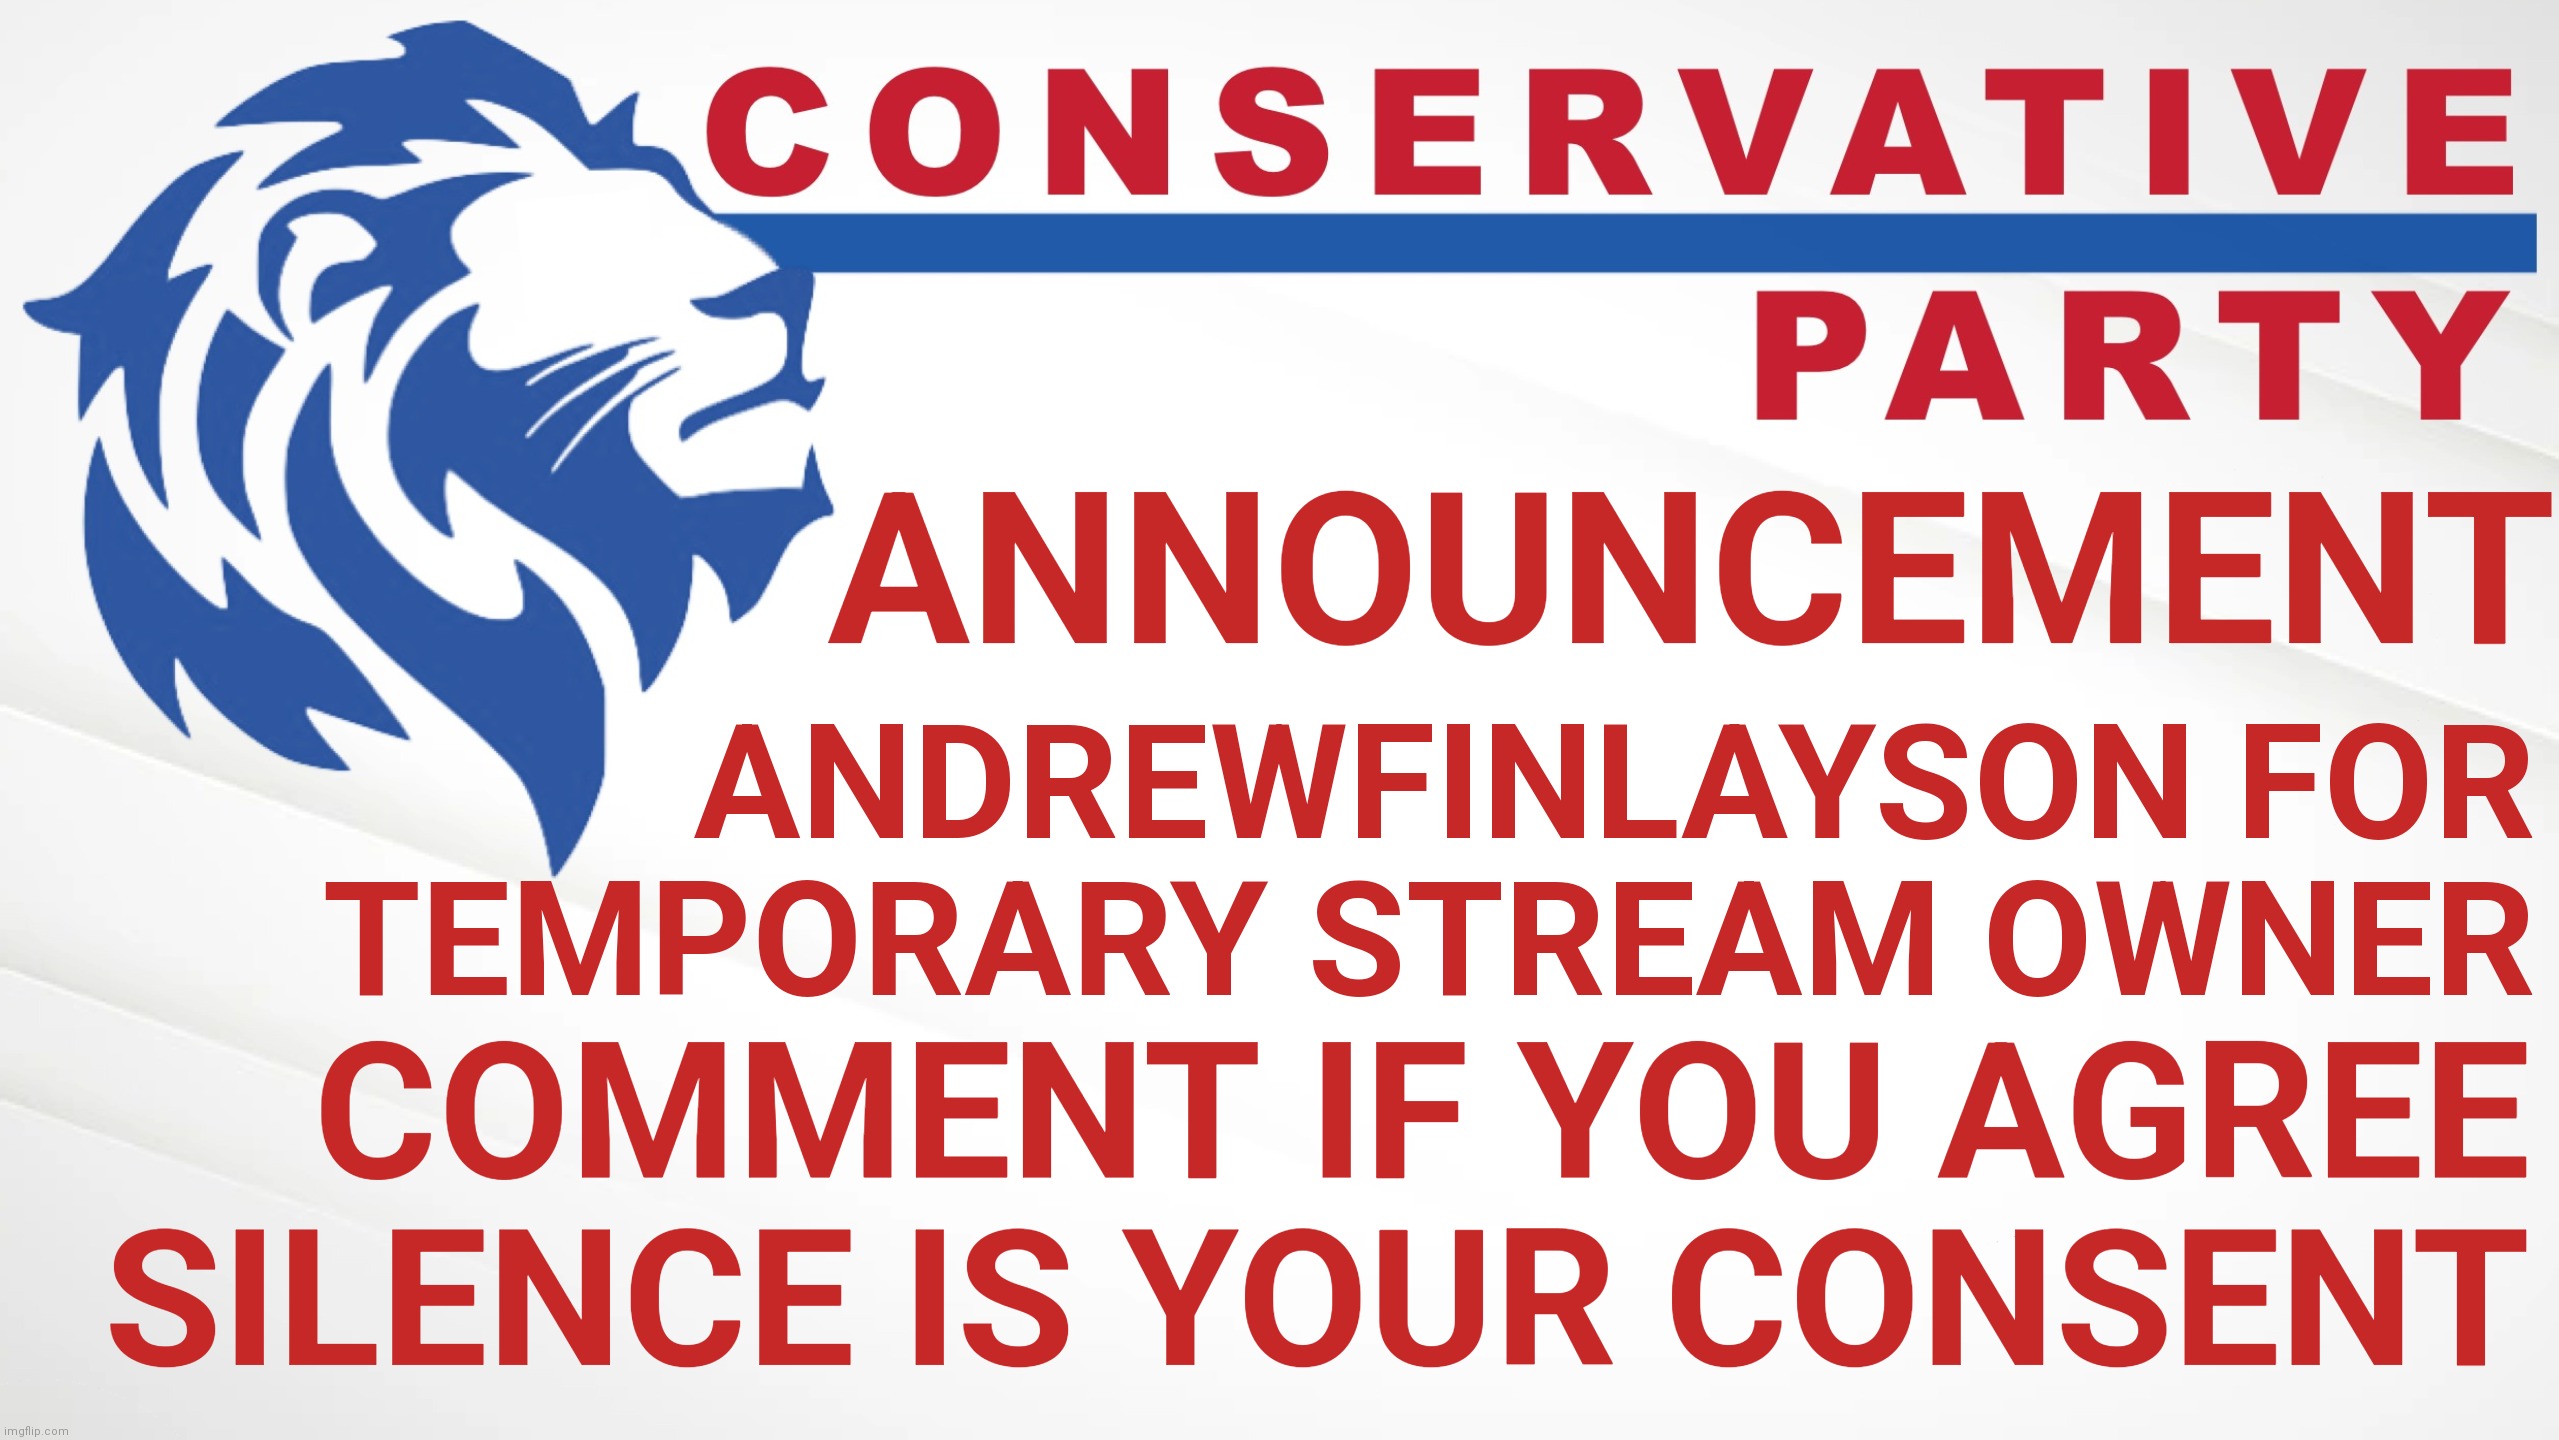 Conservative Party Announcement | ANNOUNCEMENT; ANDREWFINLAYSON FOR TEMPORARY STREAM OWNER; COMMENT IF YOU AGREE
SILENCE IS YOUR CONSENT | image tagged in conservative party announcement,burn the constitution,silence is golden,big brother,new year new you | made w/ Imgflip meme maker